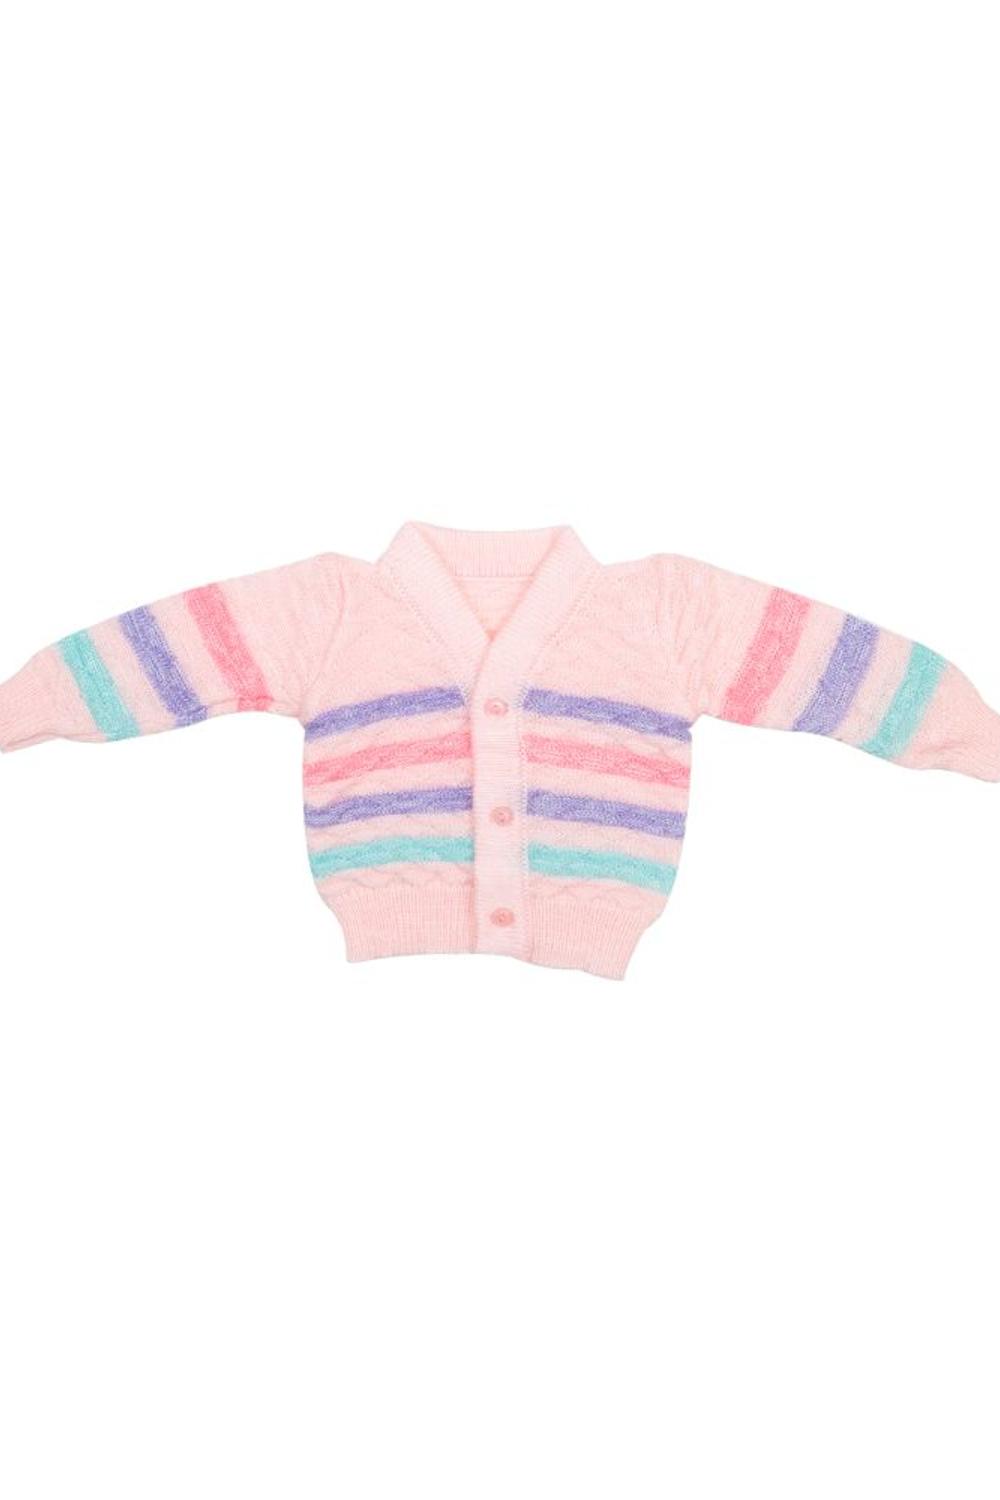 Mee Mee Baby Sweater Sets Pink